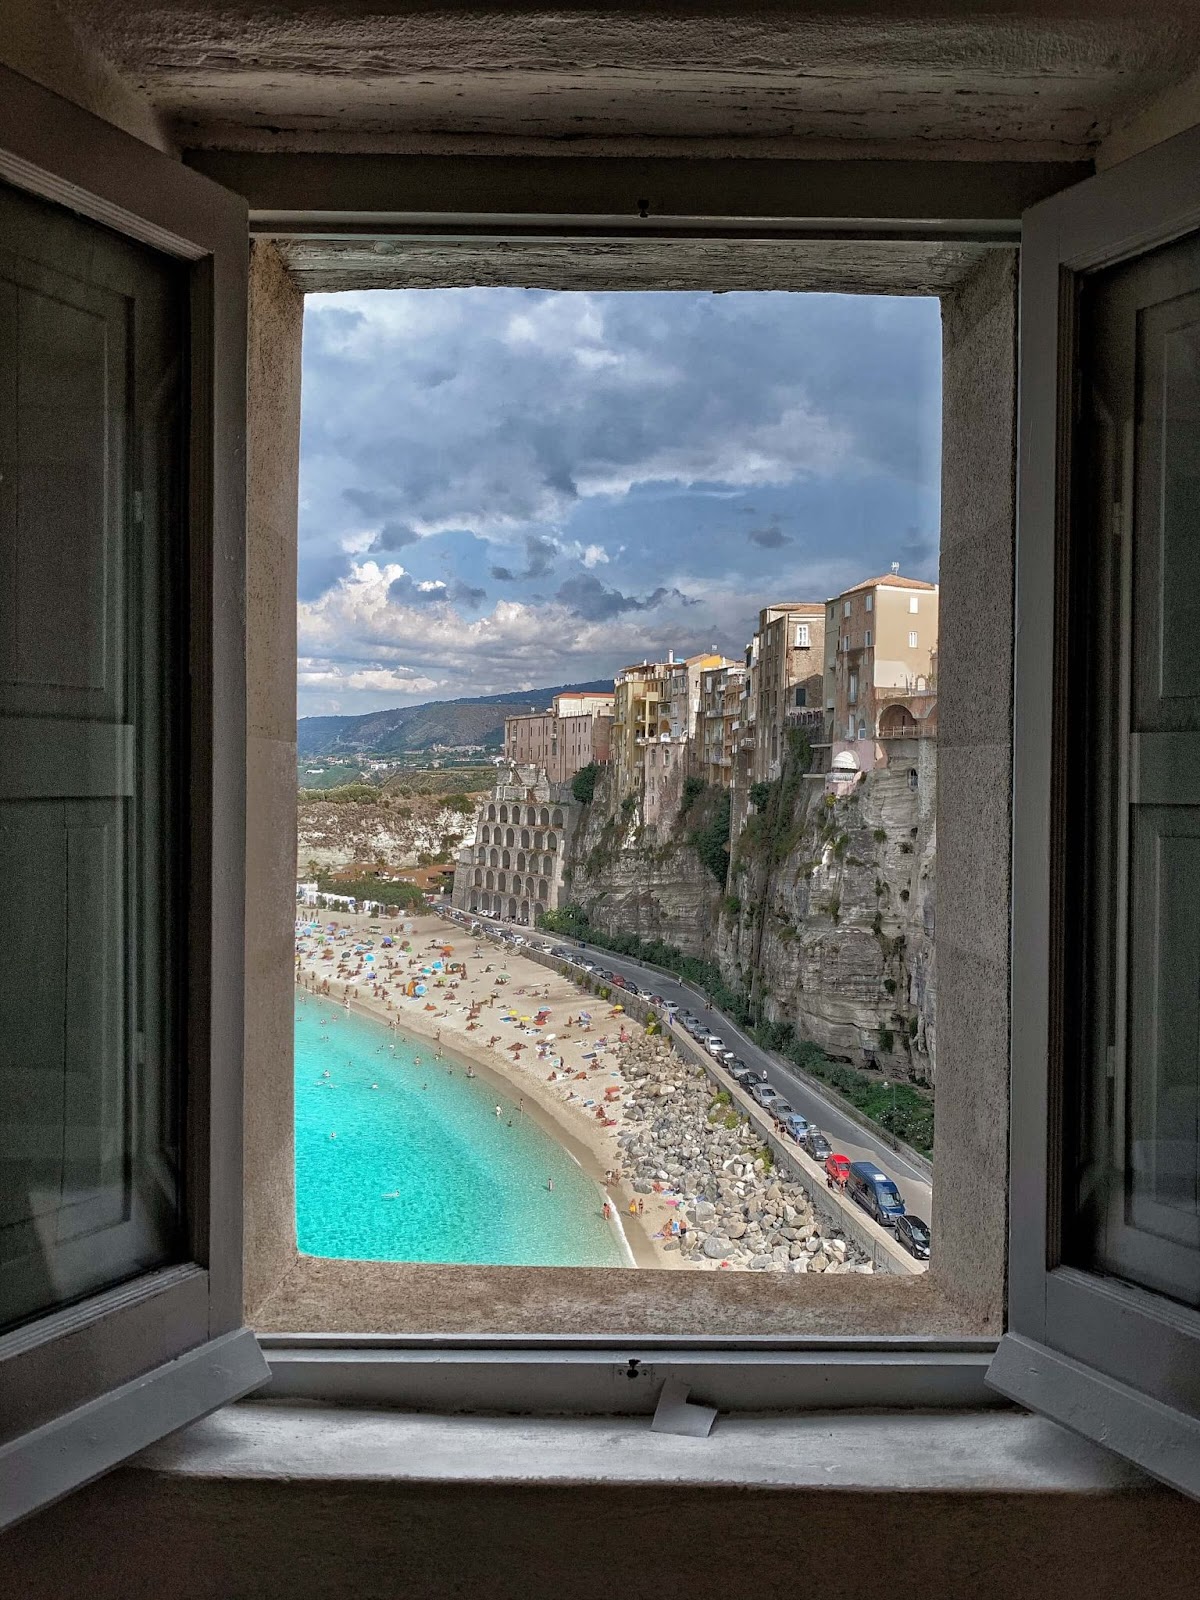 off the beaten path Italy, Tropea, window with a view, beach, buildings on cliff